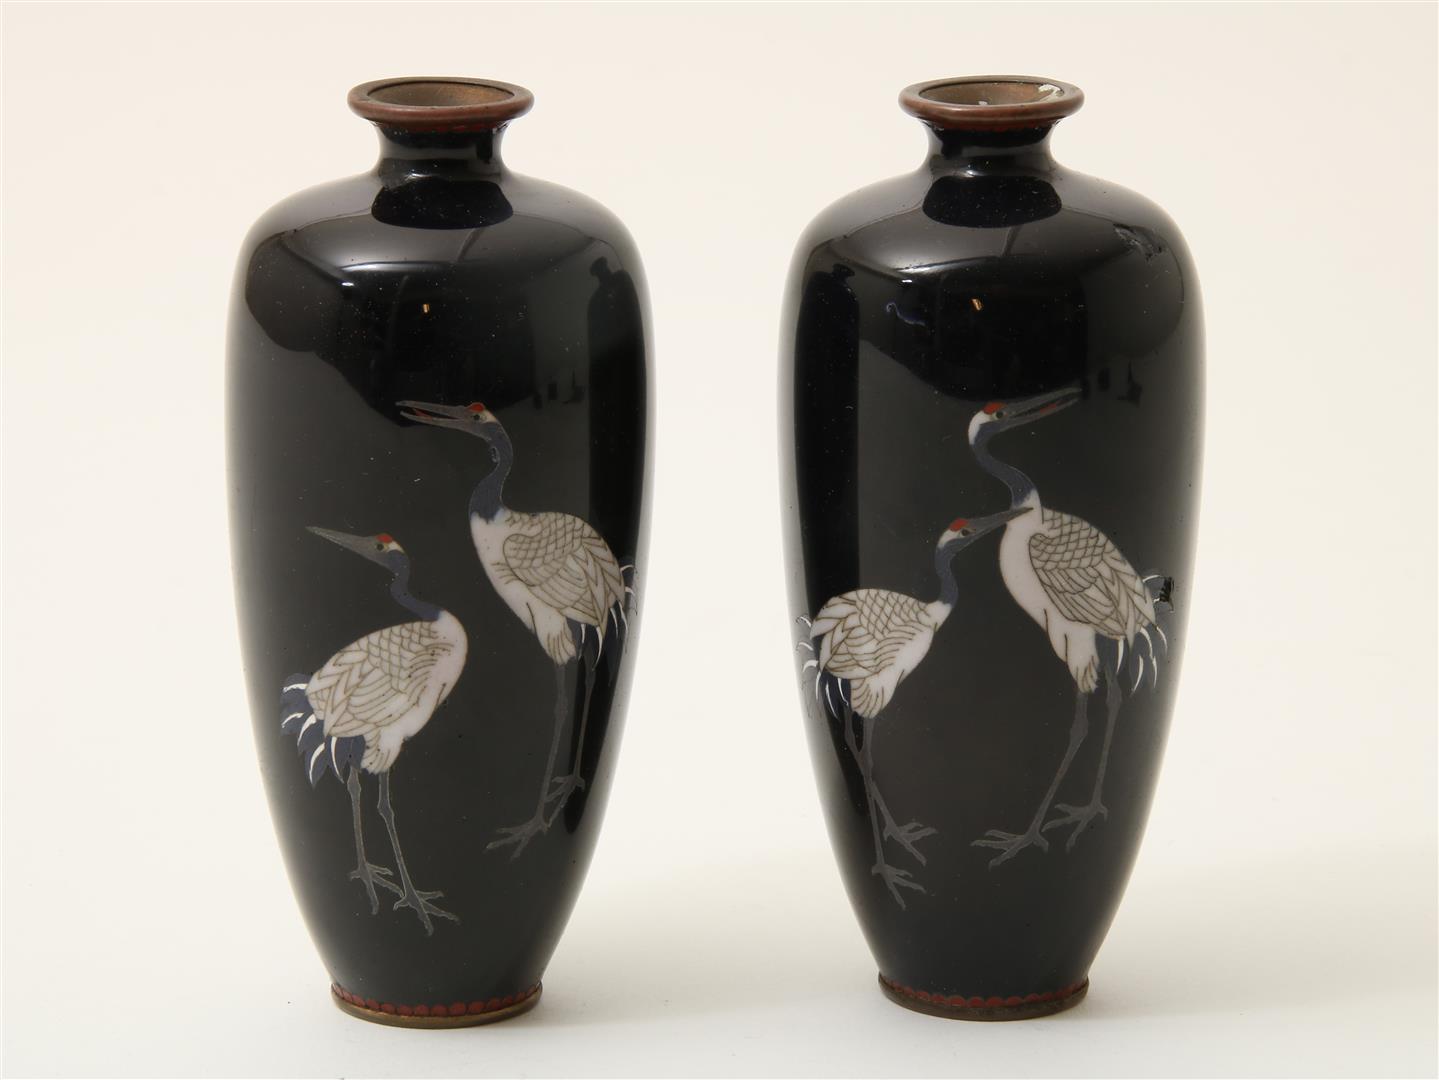 Set cloisonne vases, decorated with cranes, Japan Meiji period, both signed on the bottom, height: